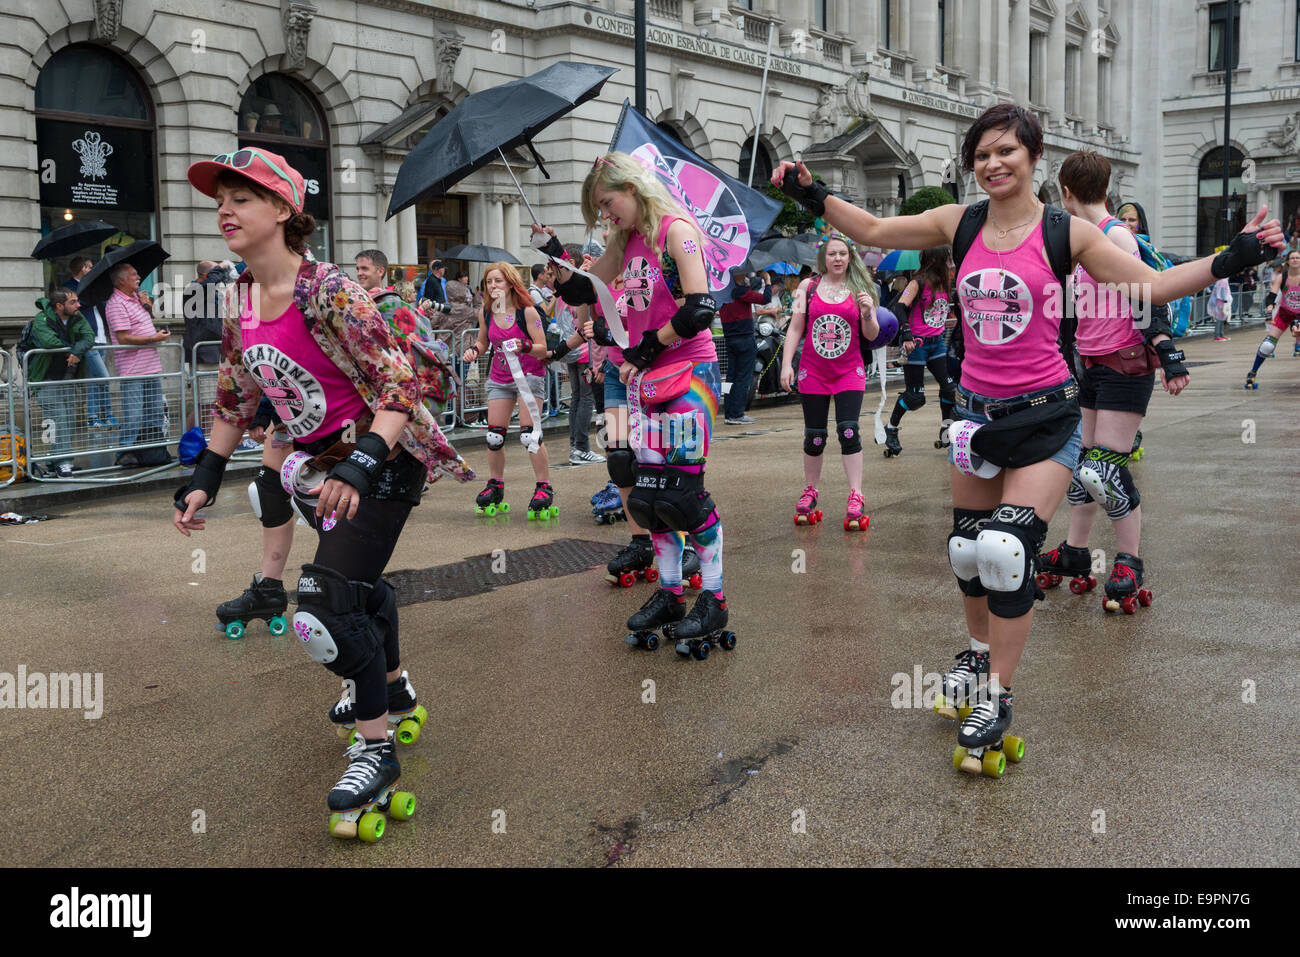 London Rollergirls taking part in the London Pride Parade 2014, London, England Stock Photo